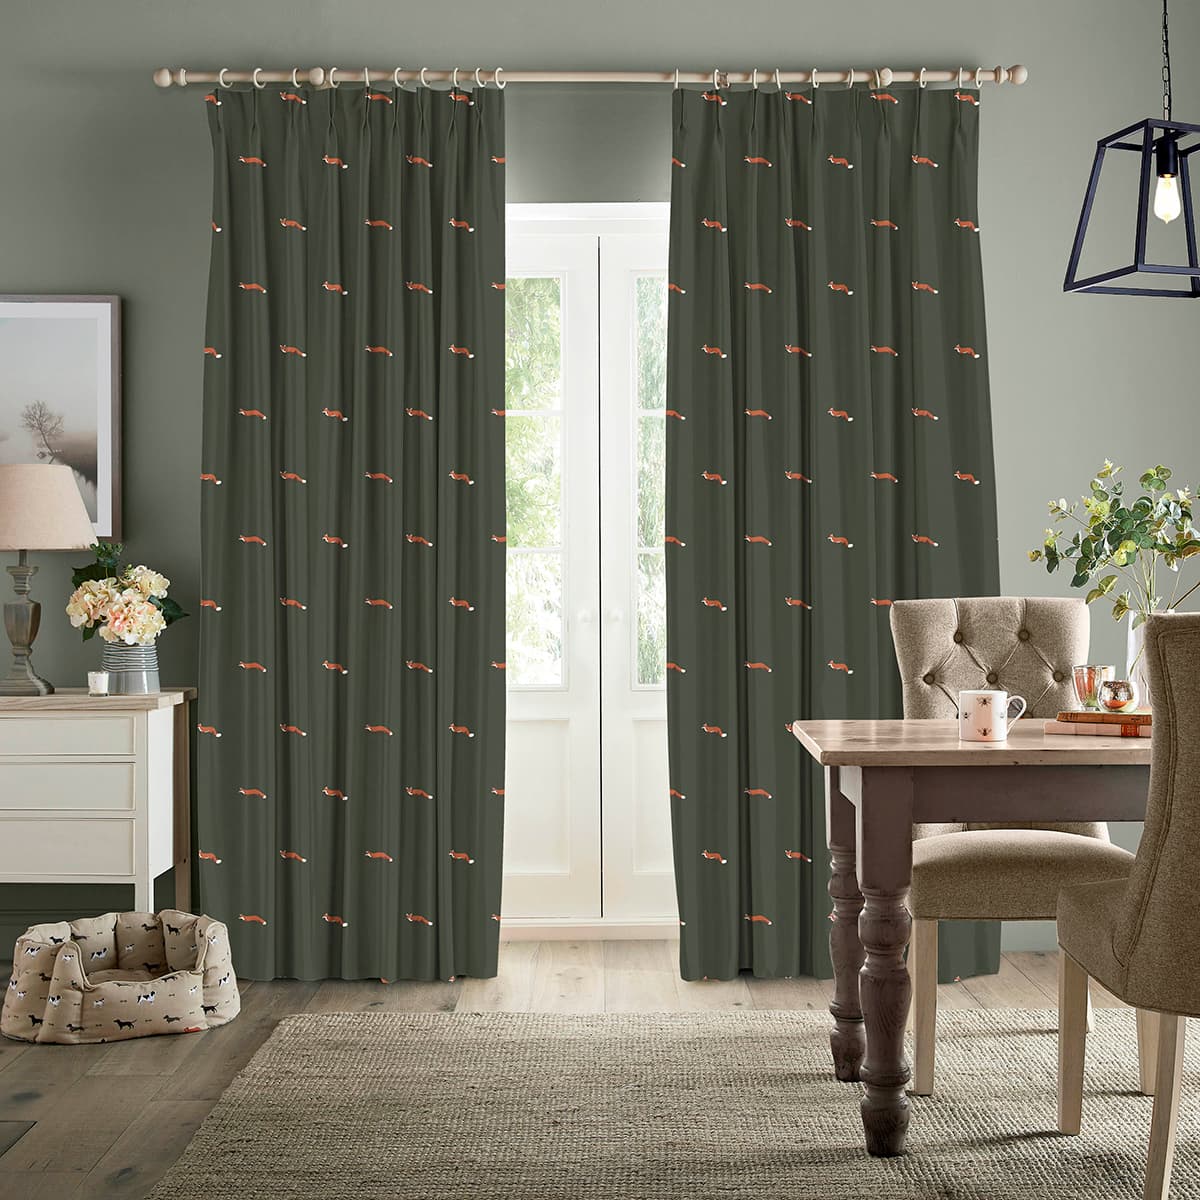 Foxes Forest Green Made to Measure Curtains